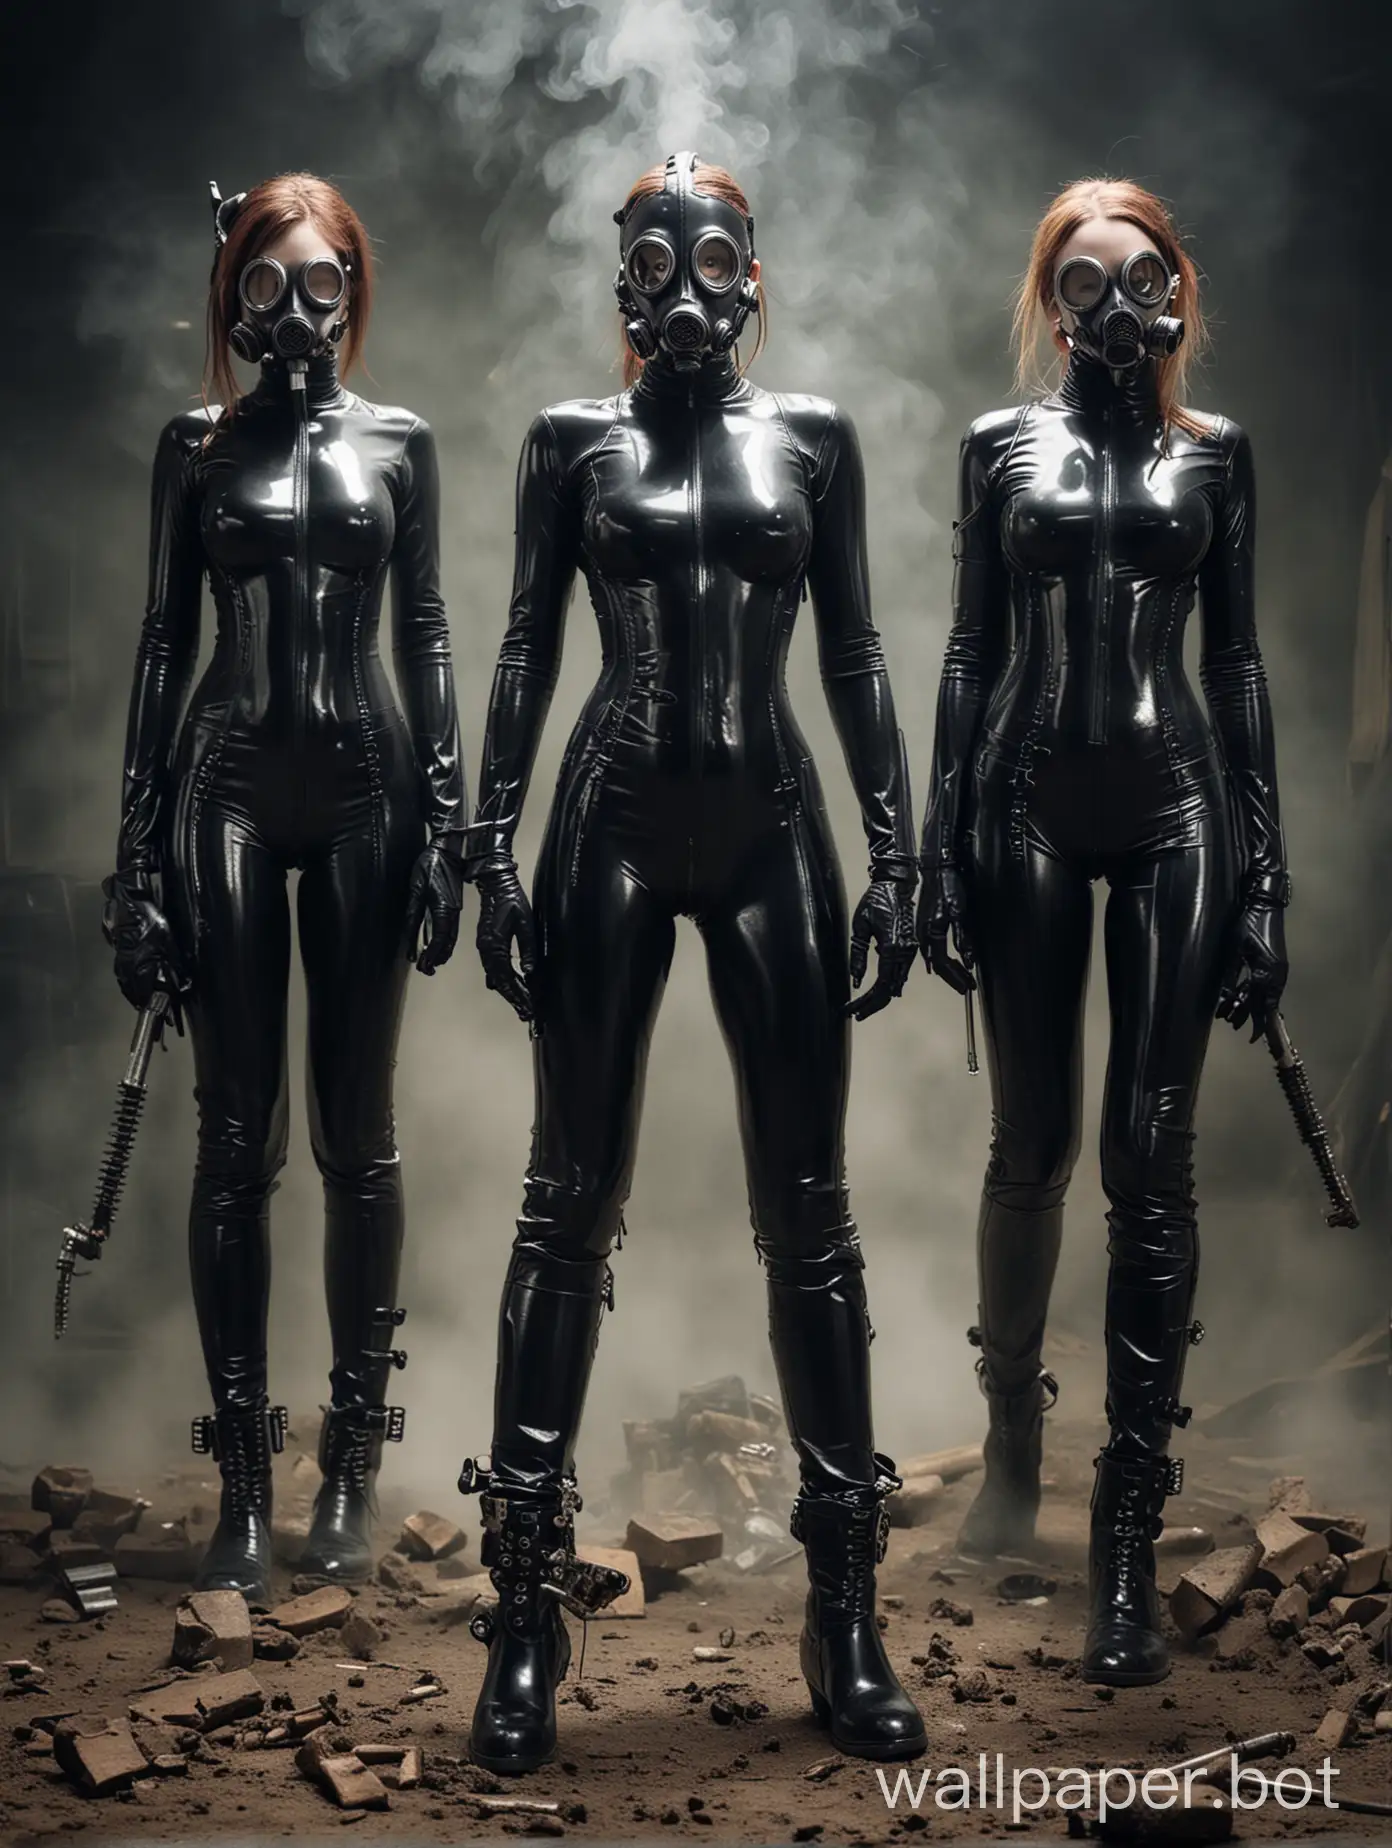 Latex-Catsuit-Models-Collide-in-Gothcore-Multiverse